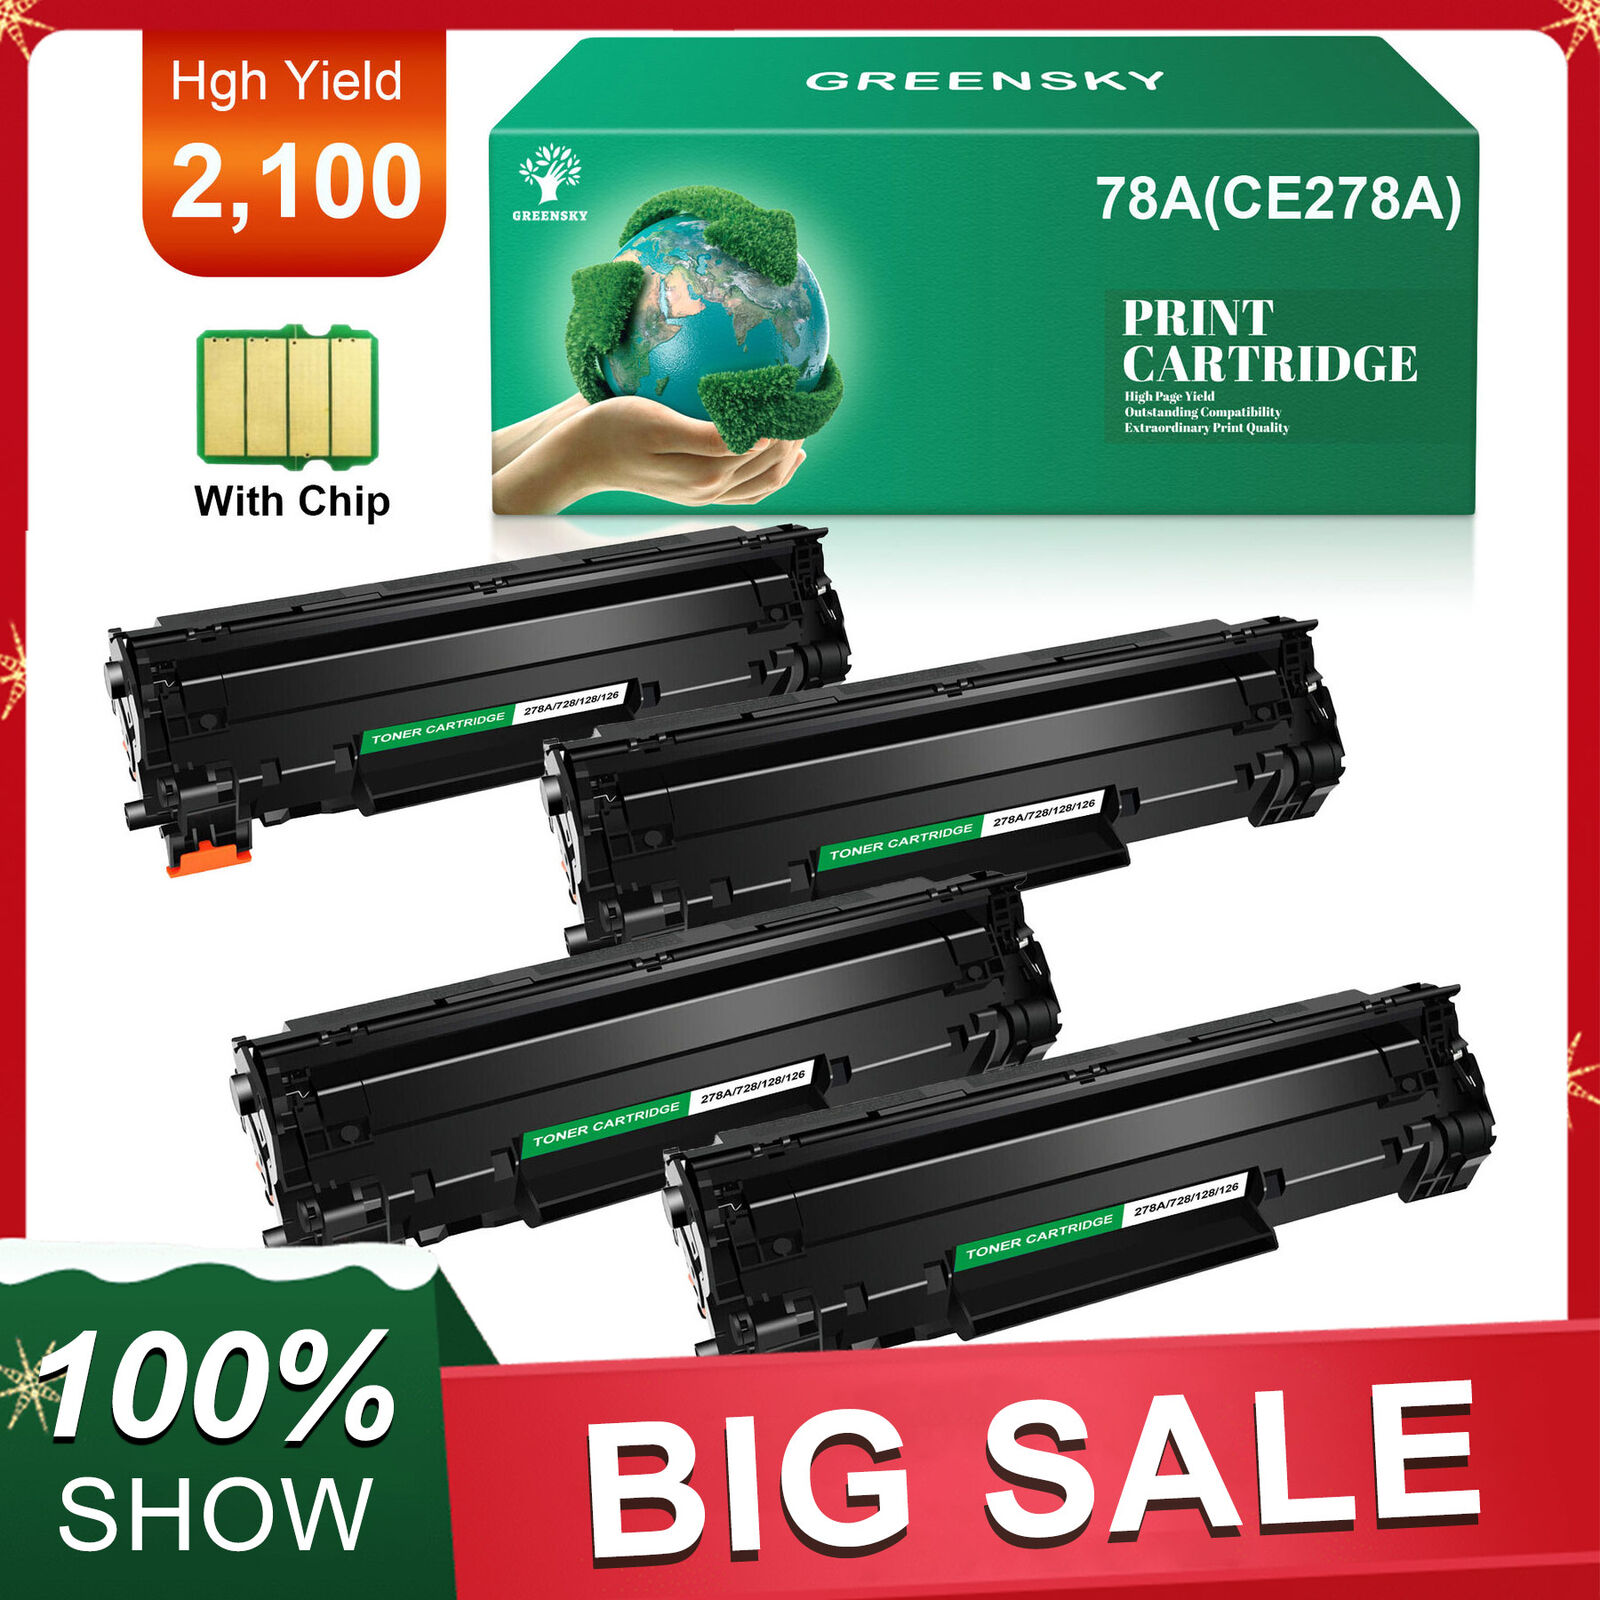 4x CE278A Toner Cartridge For HP LaserJet 78A P1606 P1606dn 1536dnf M1536dnf MFP